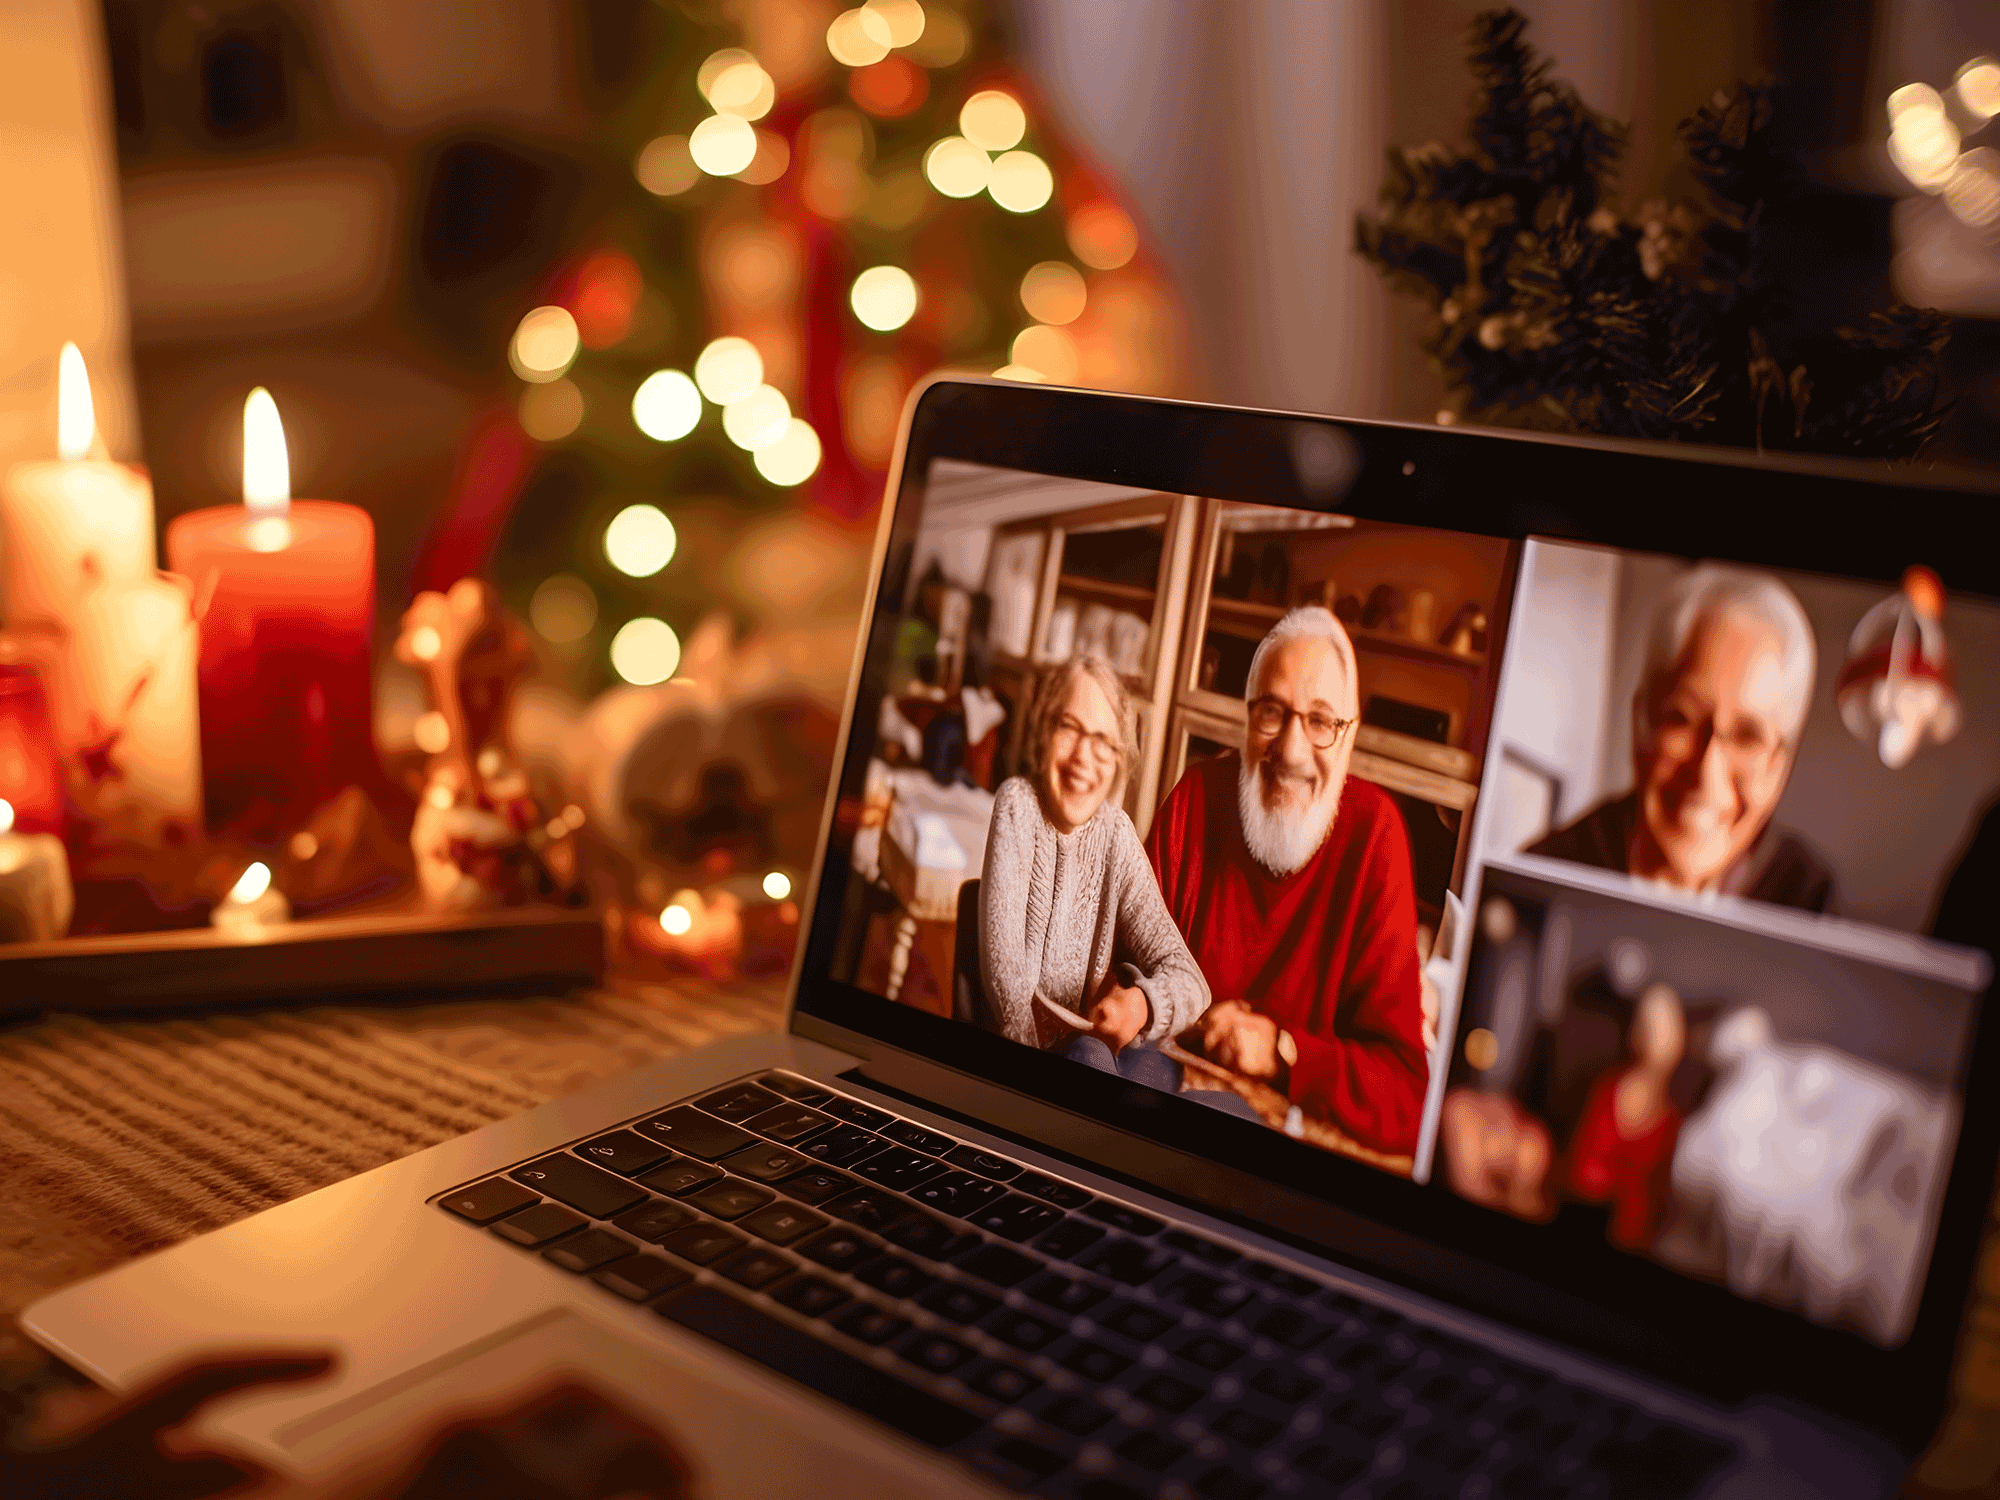 people on a computer screen surrounded by holiday decor in a room